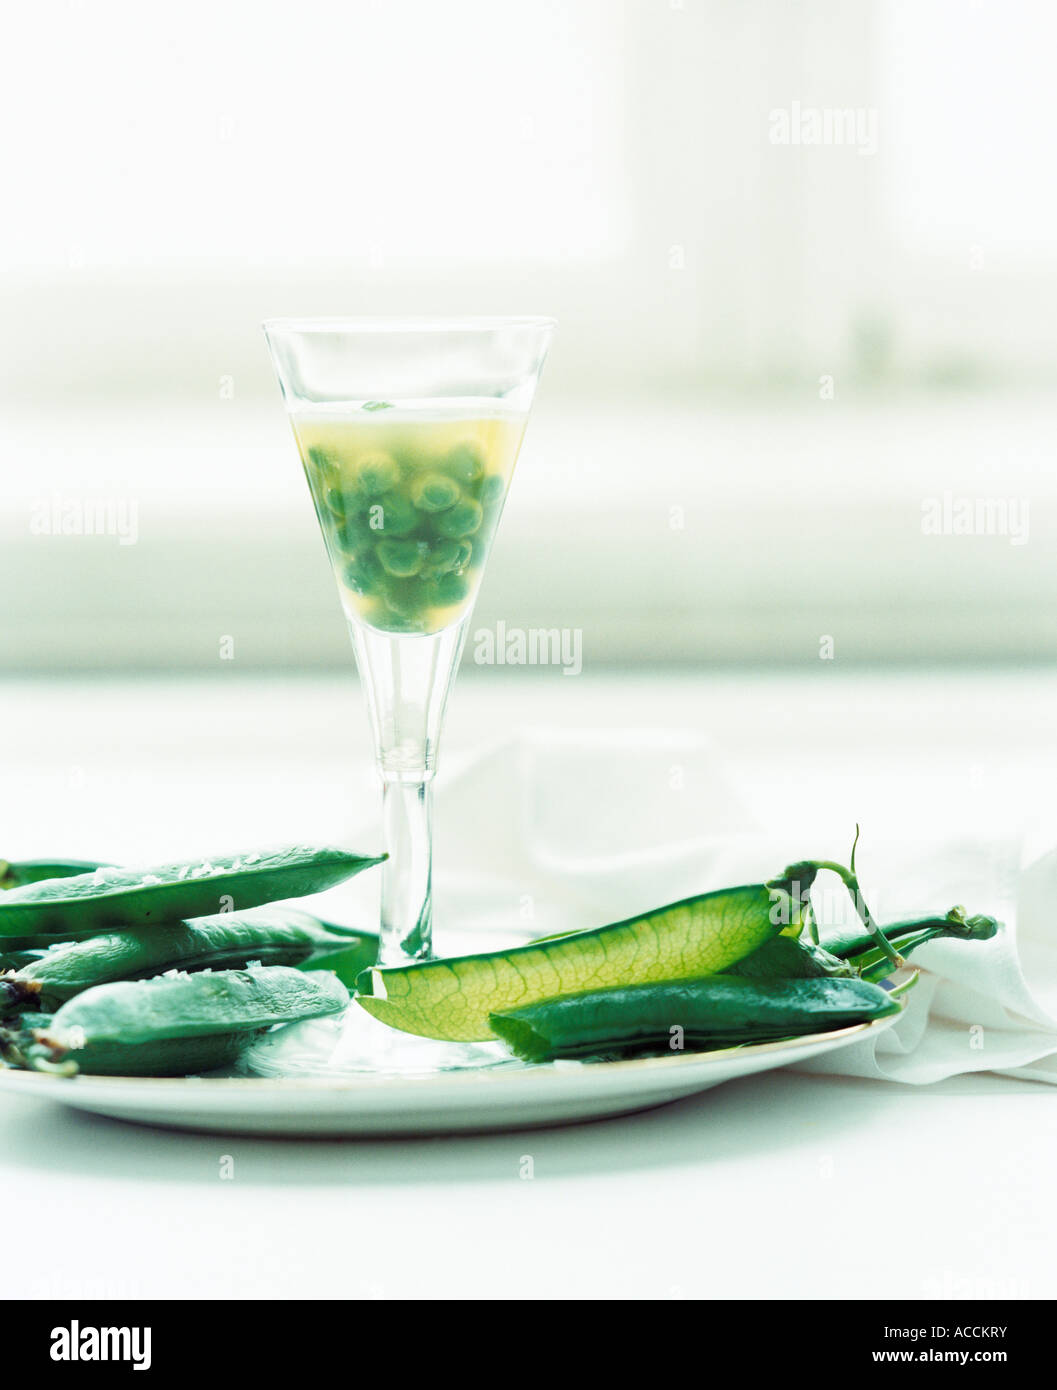 Pea jelly in a glass. Stock Photo